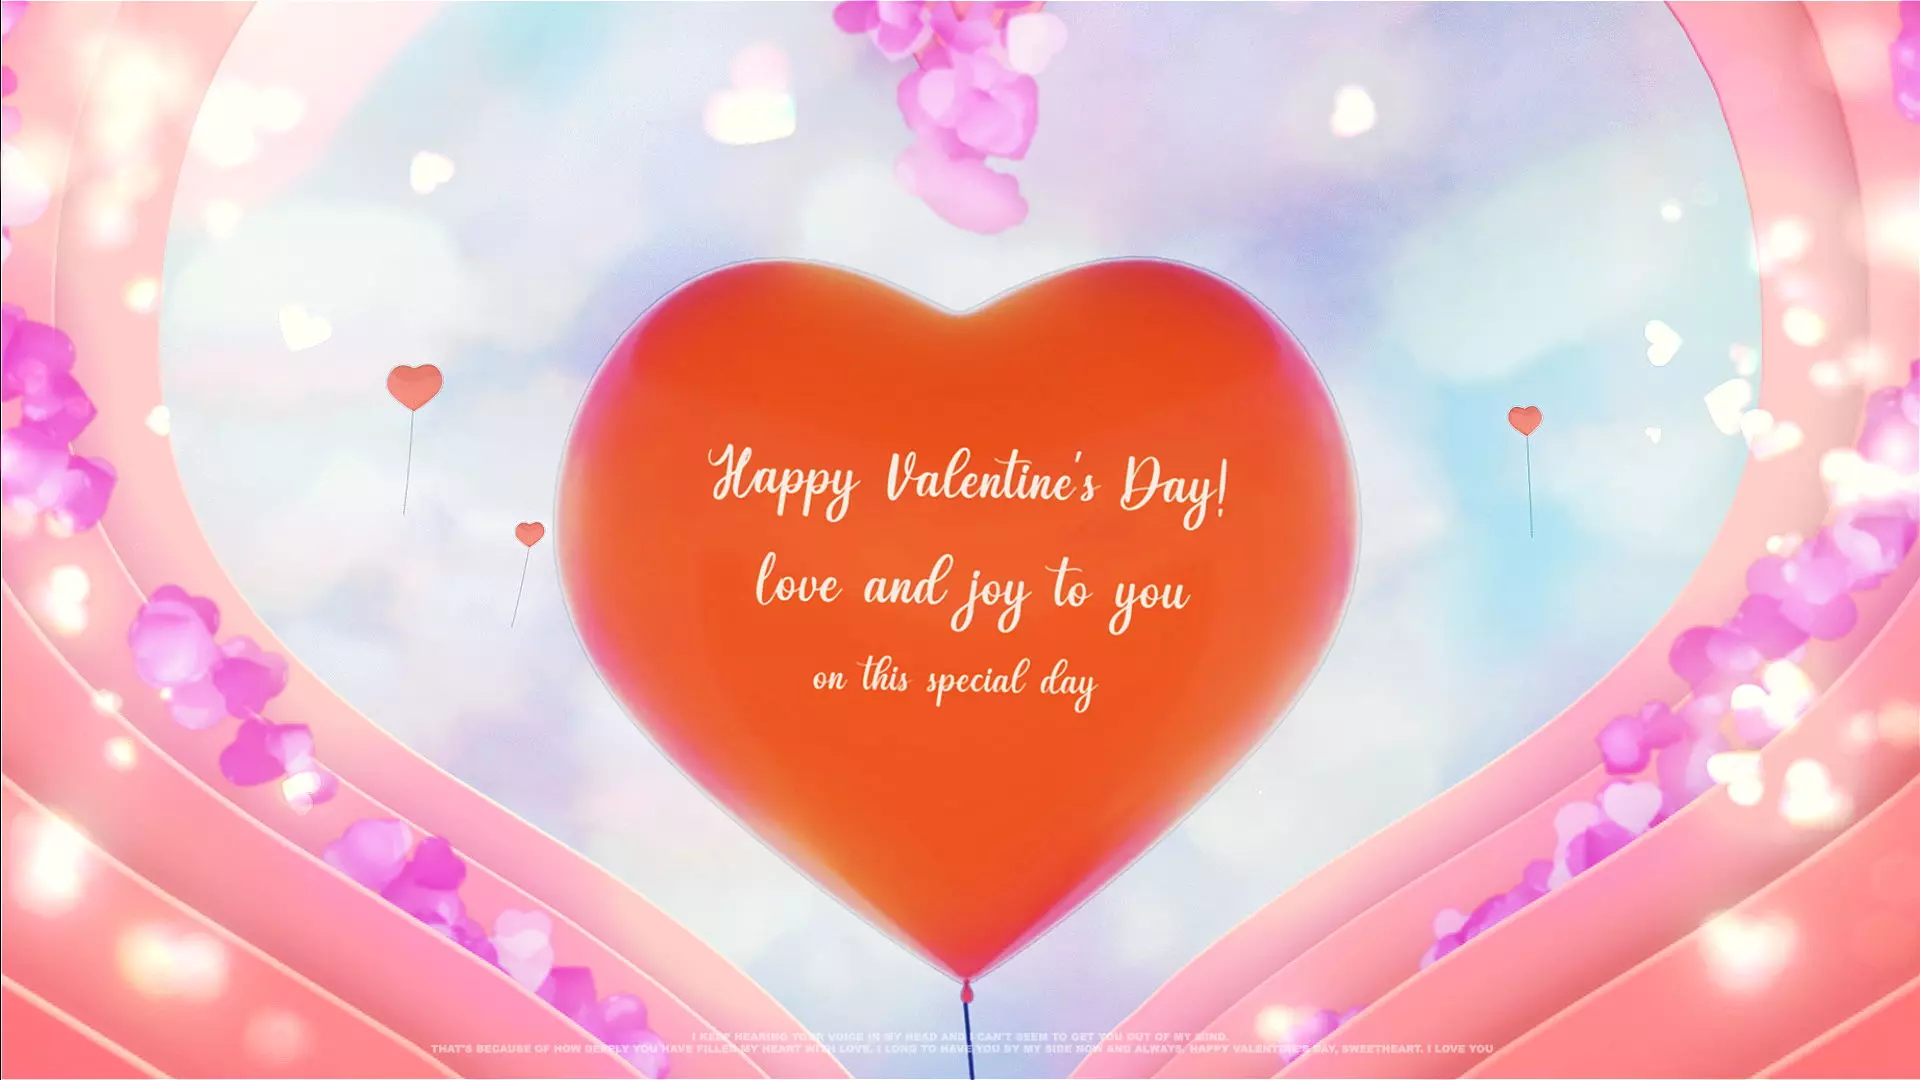 falentine’s day greetings_2024_41